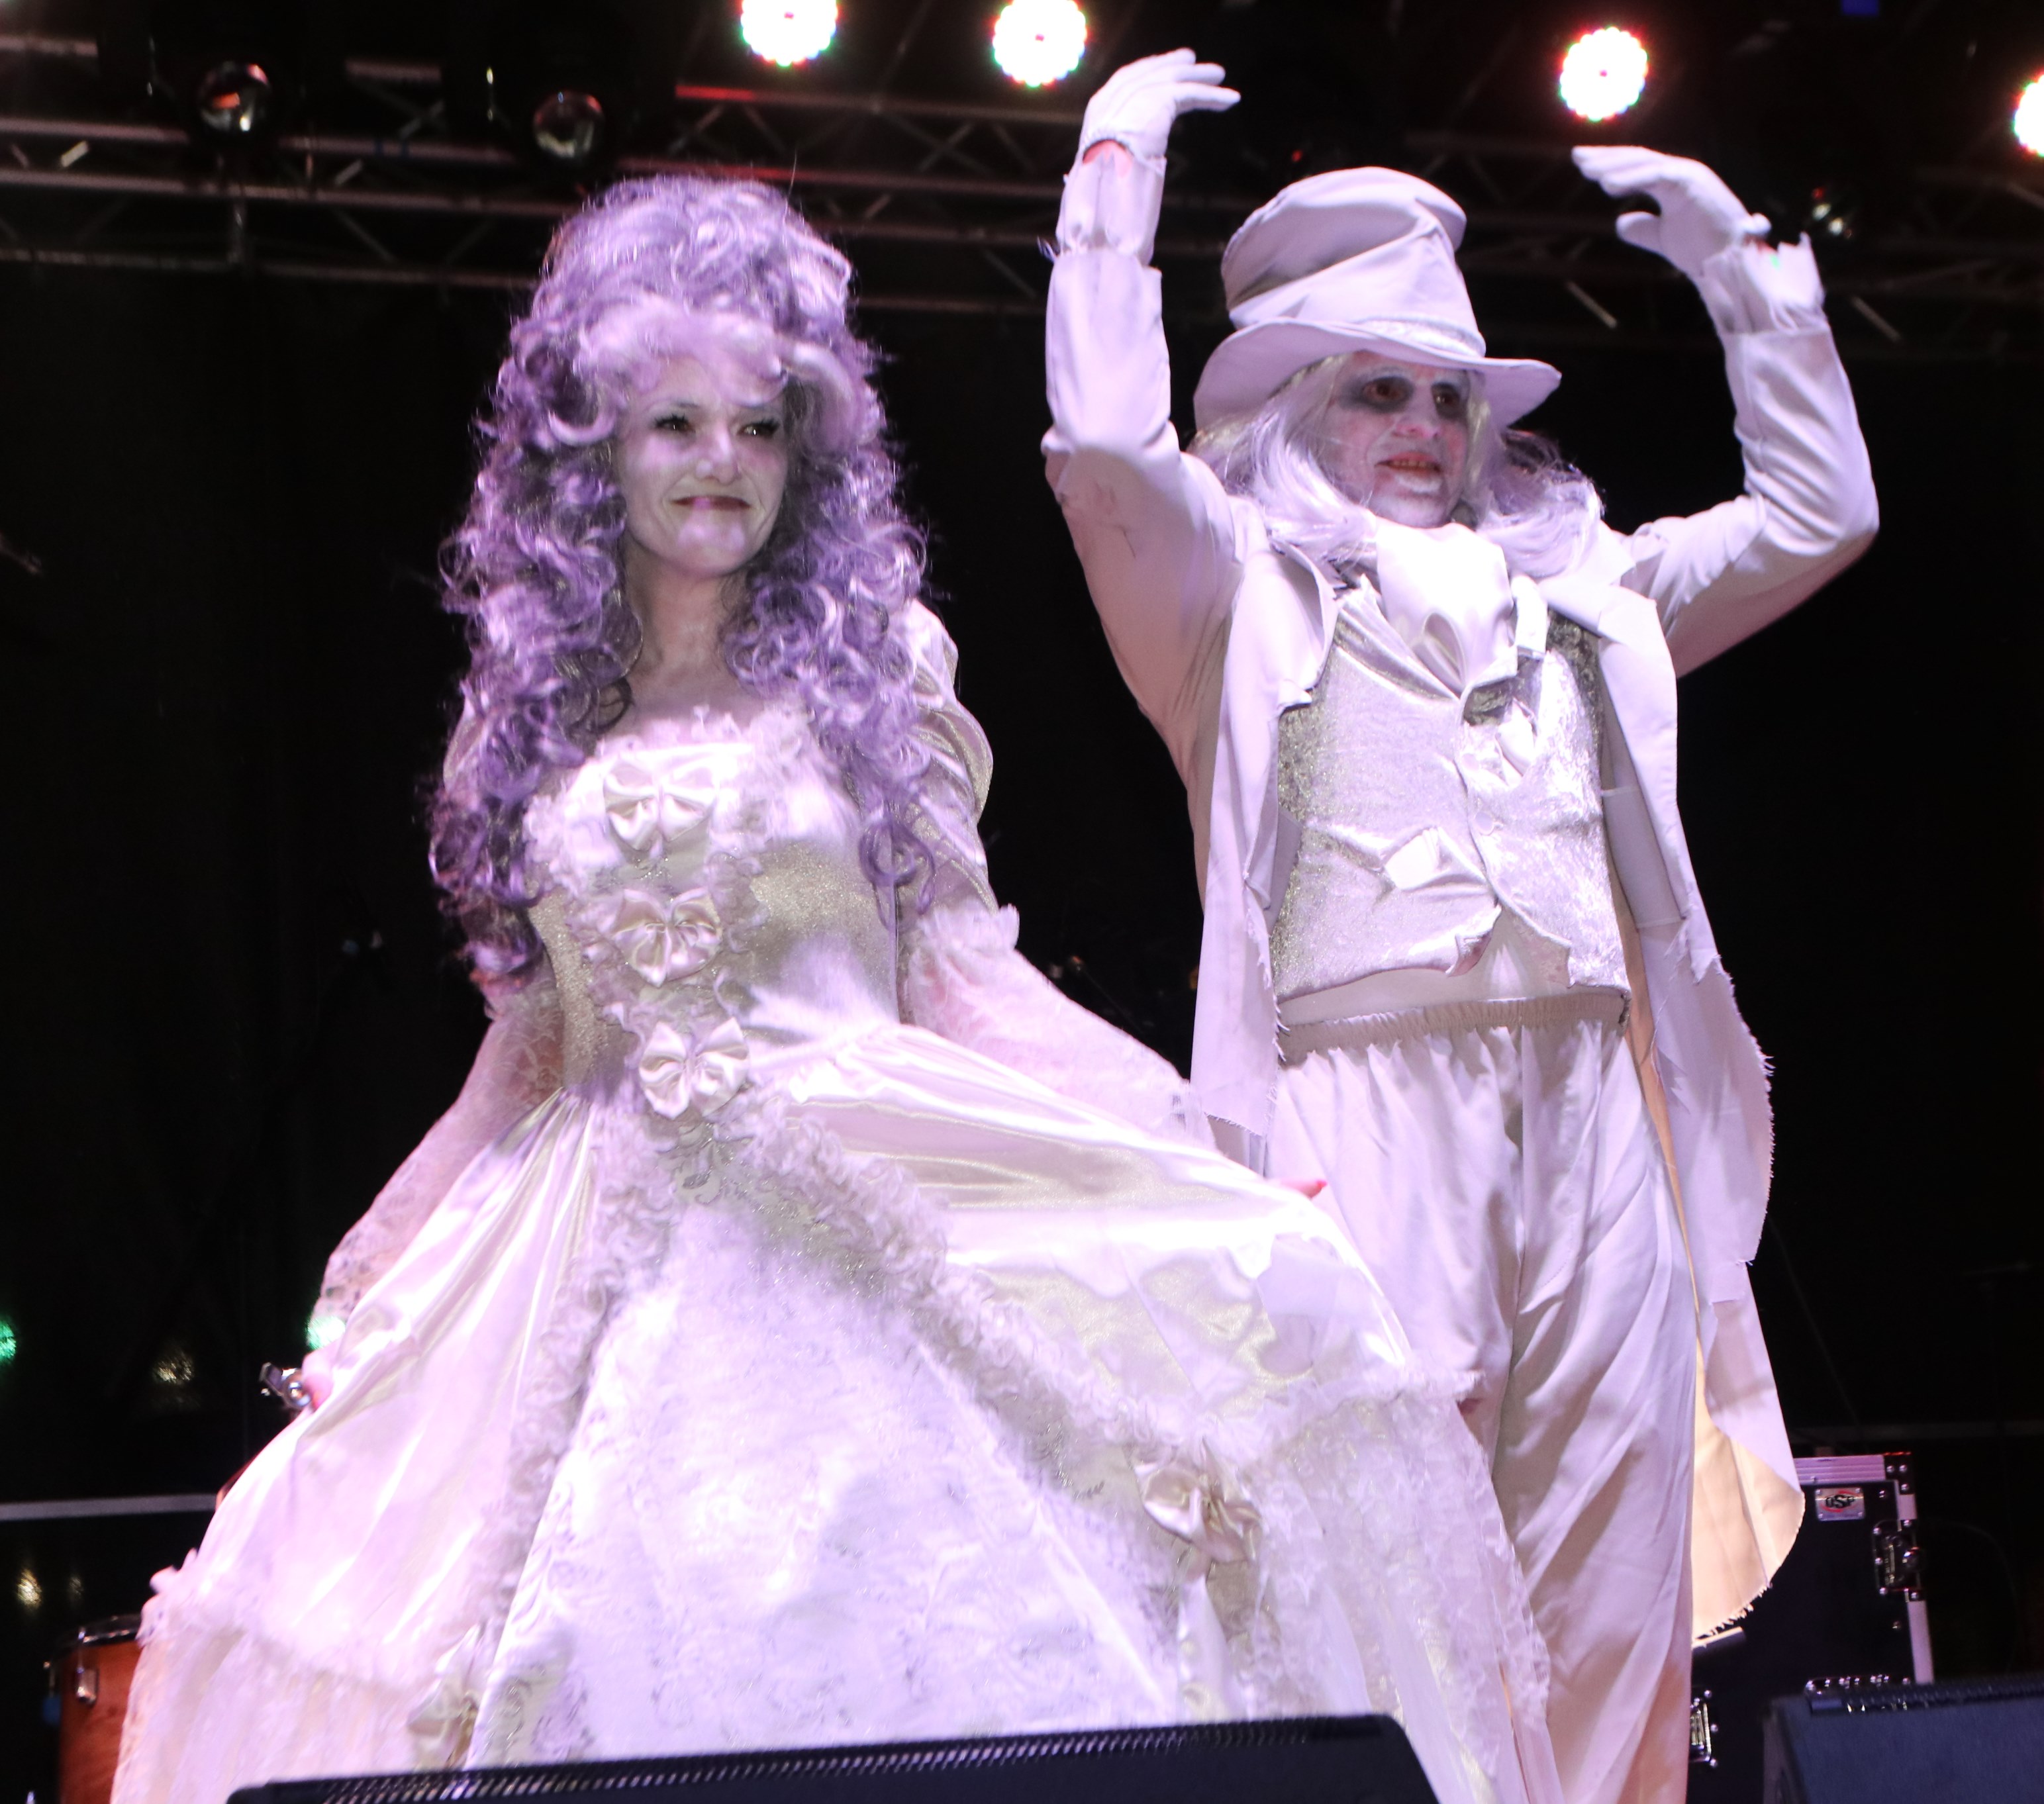 High Class Viennese Zombies about to break into a waltz at at Moonfest 2019 Costume Contest (photo by: Mike Jalches)